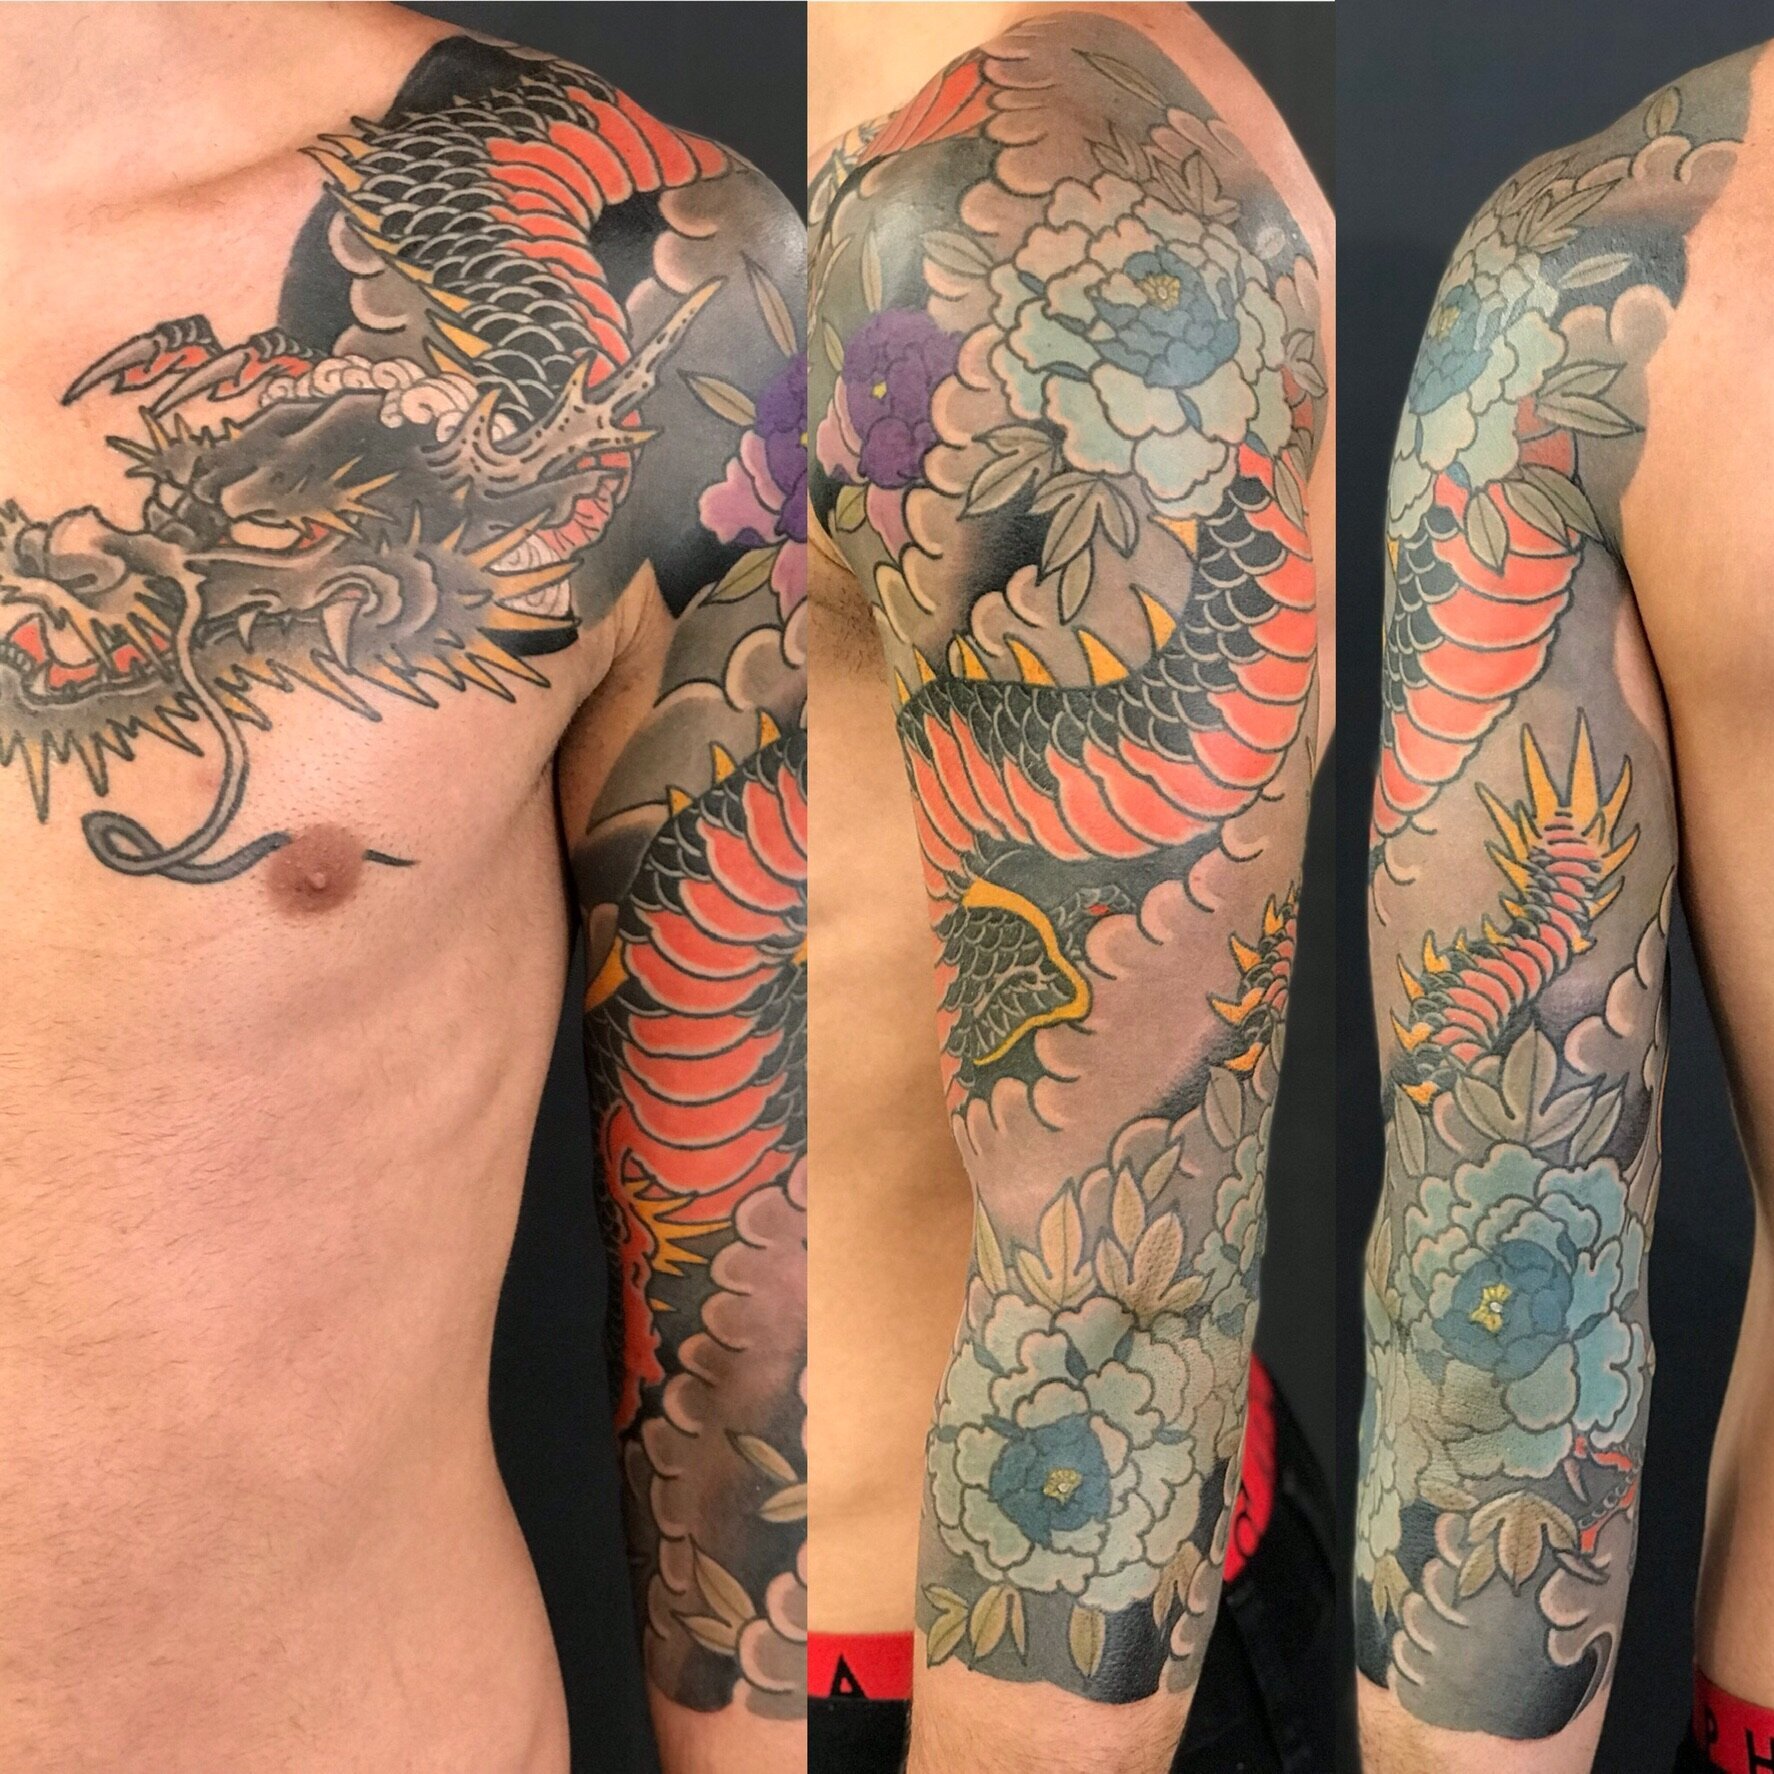 Share 93 about japanese full sleeve tattoo super cool  indaotaonec